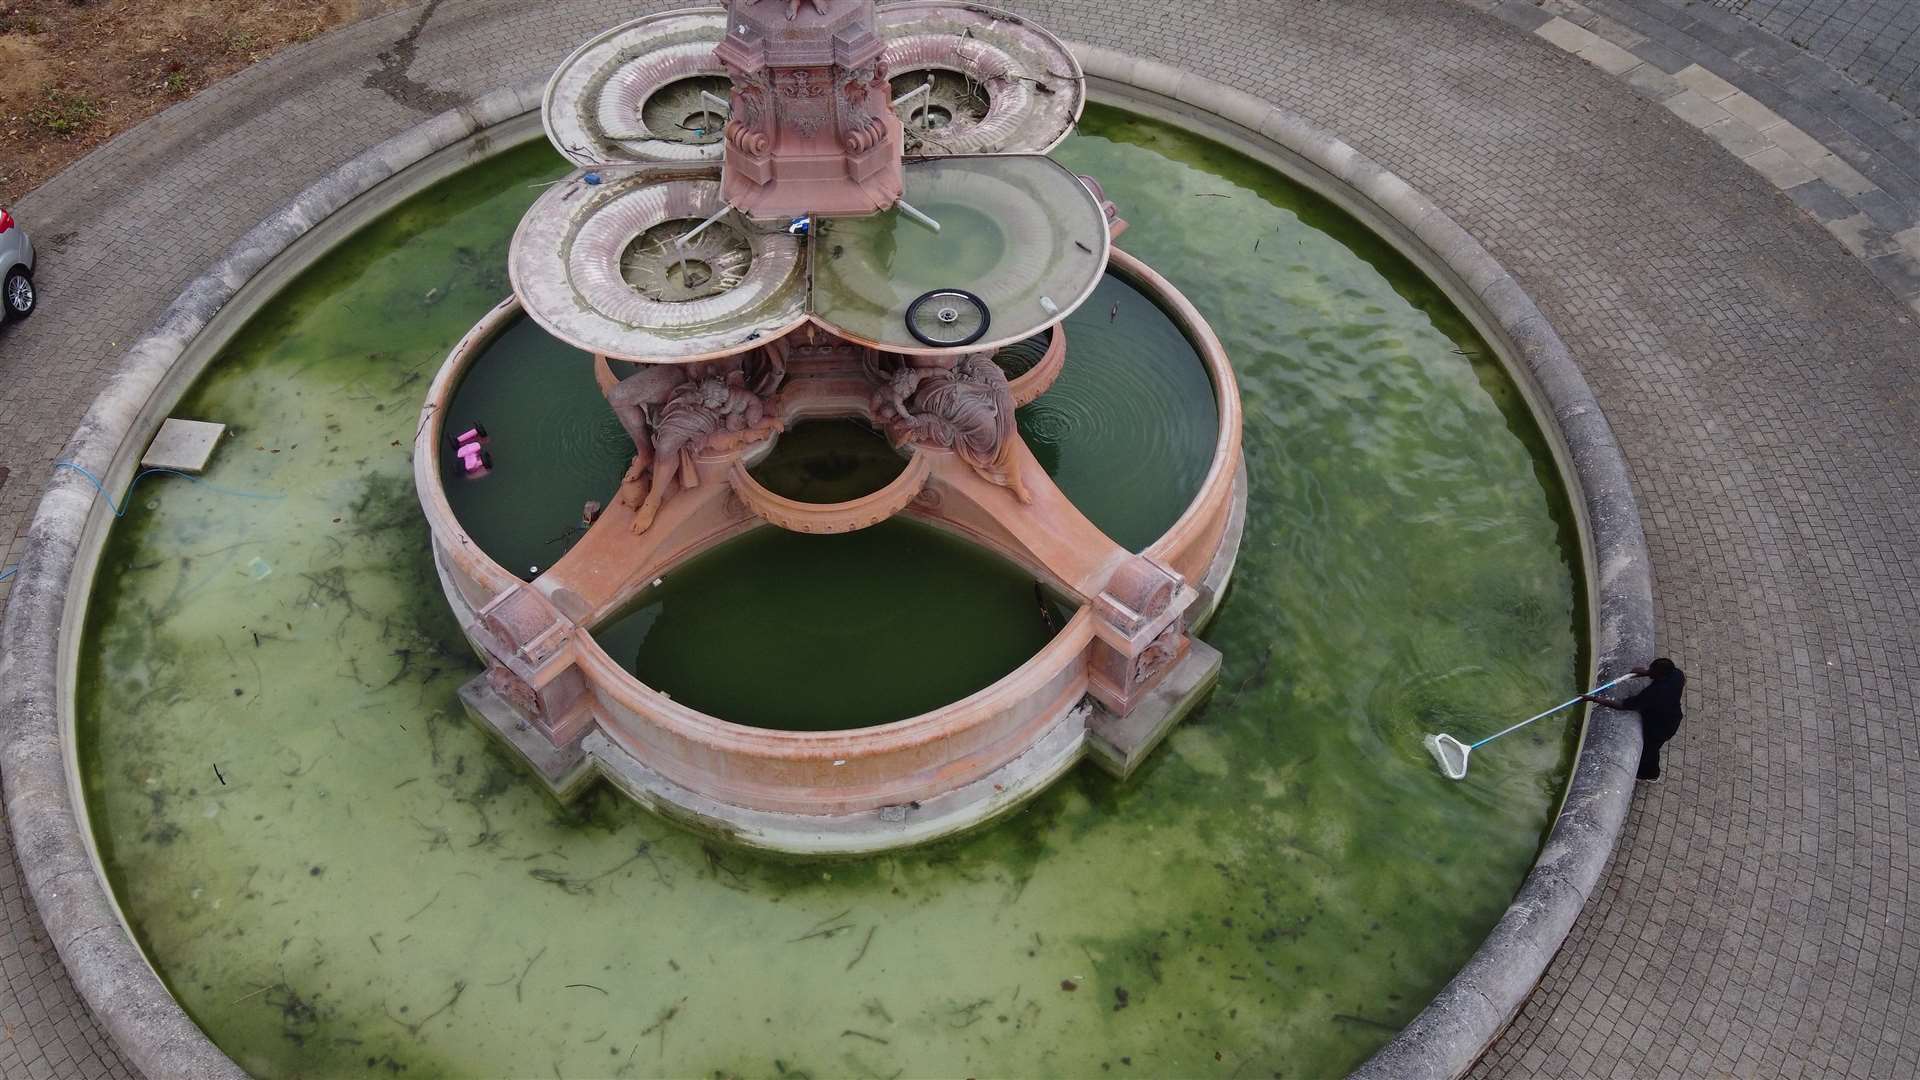 After looking at the pictures he had taken using his drone, Michael noticed the fountain was in a poor condition